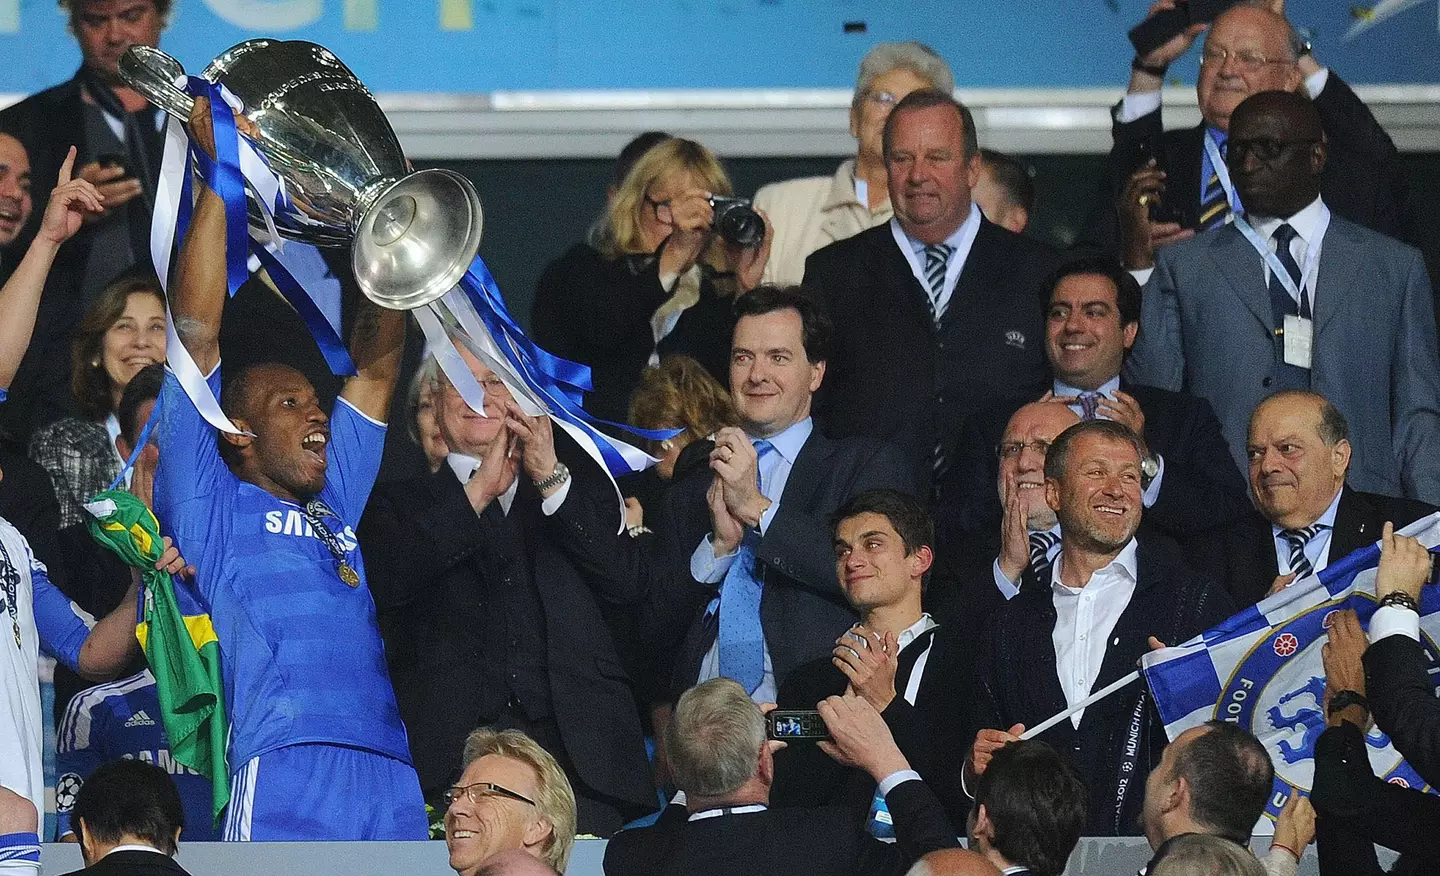 Chelsea won a first Champions League in 2012.